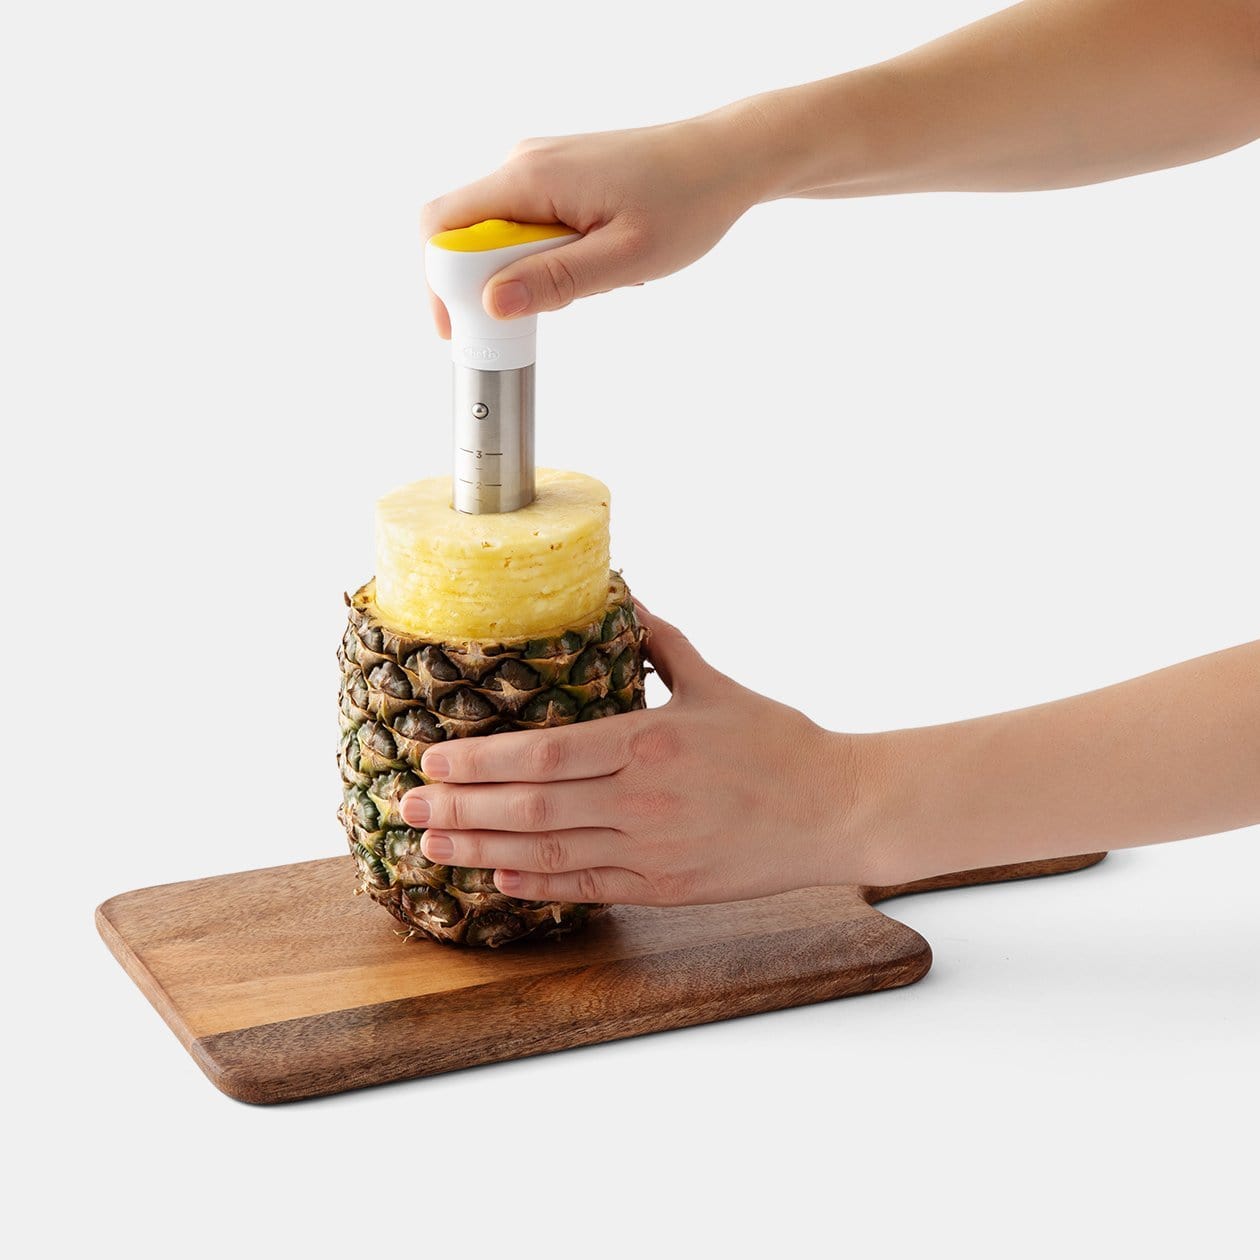 How to Core a Pineapple